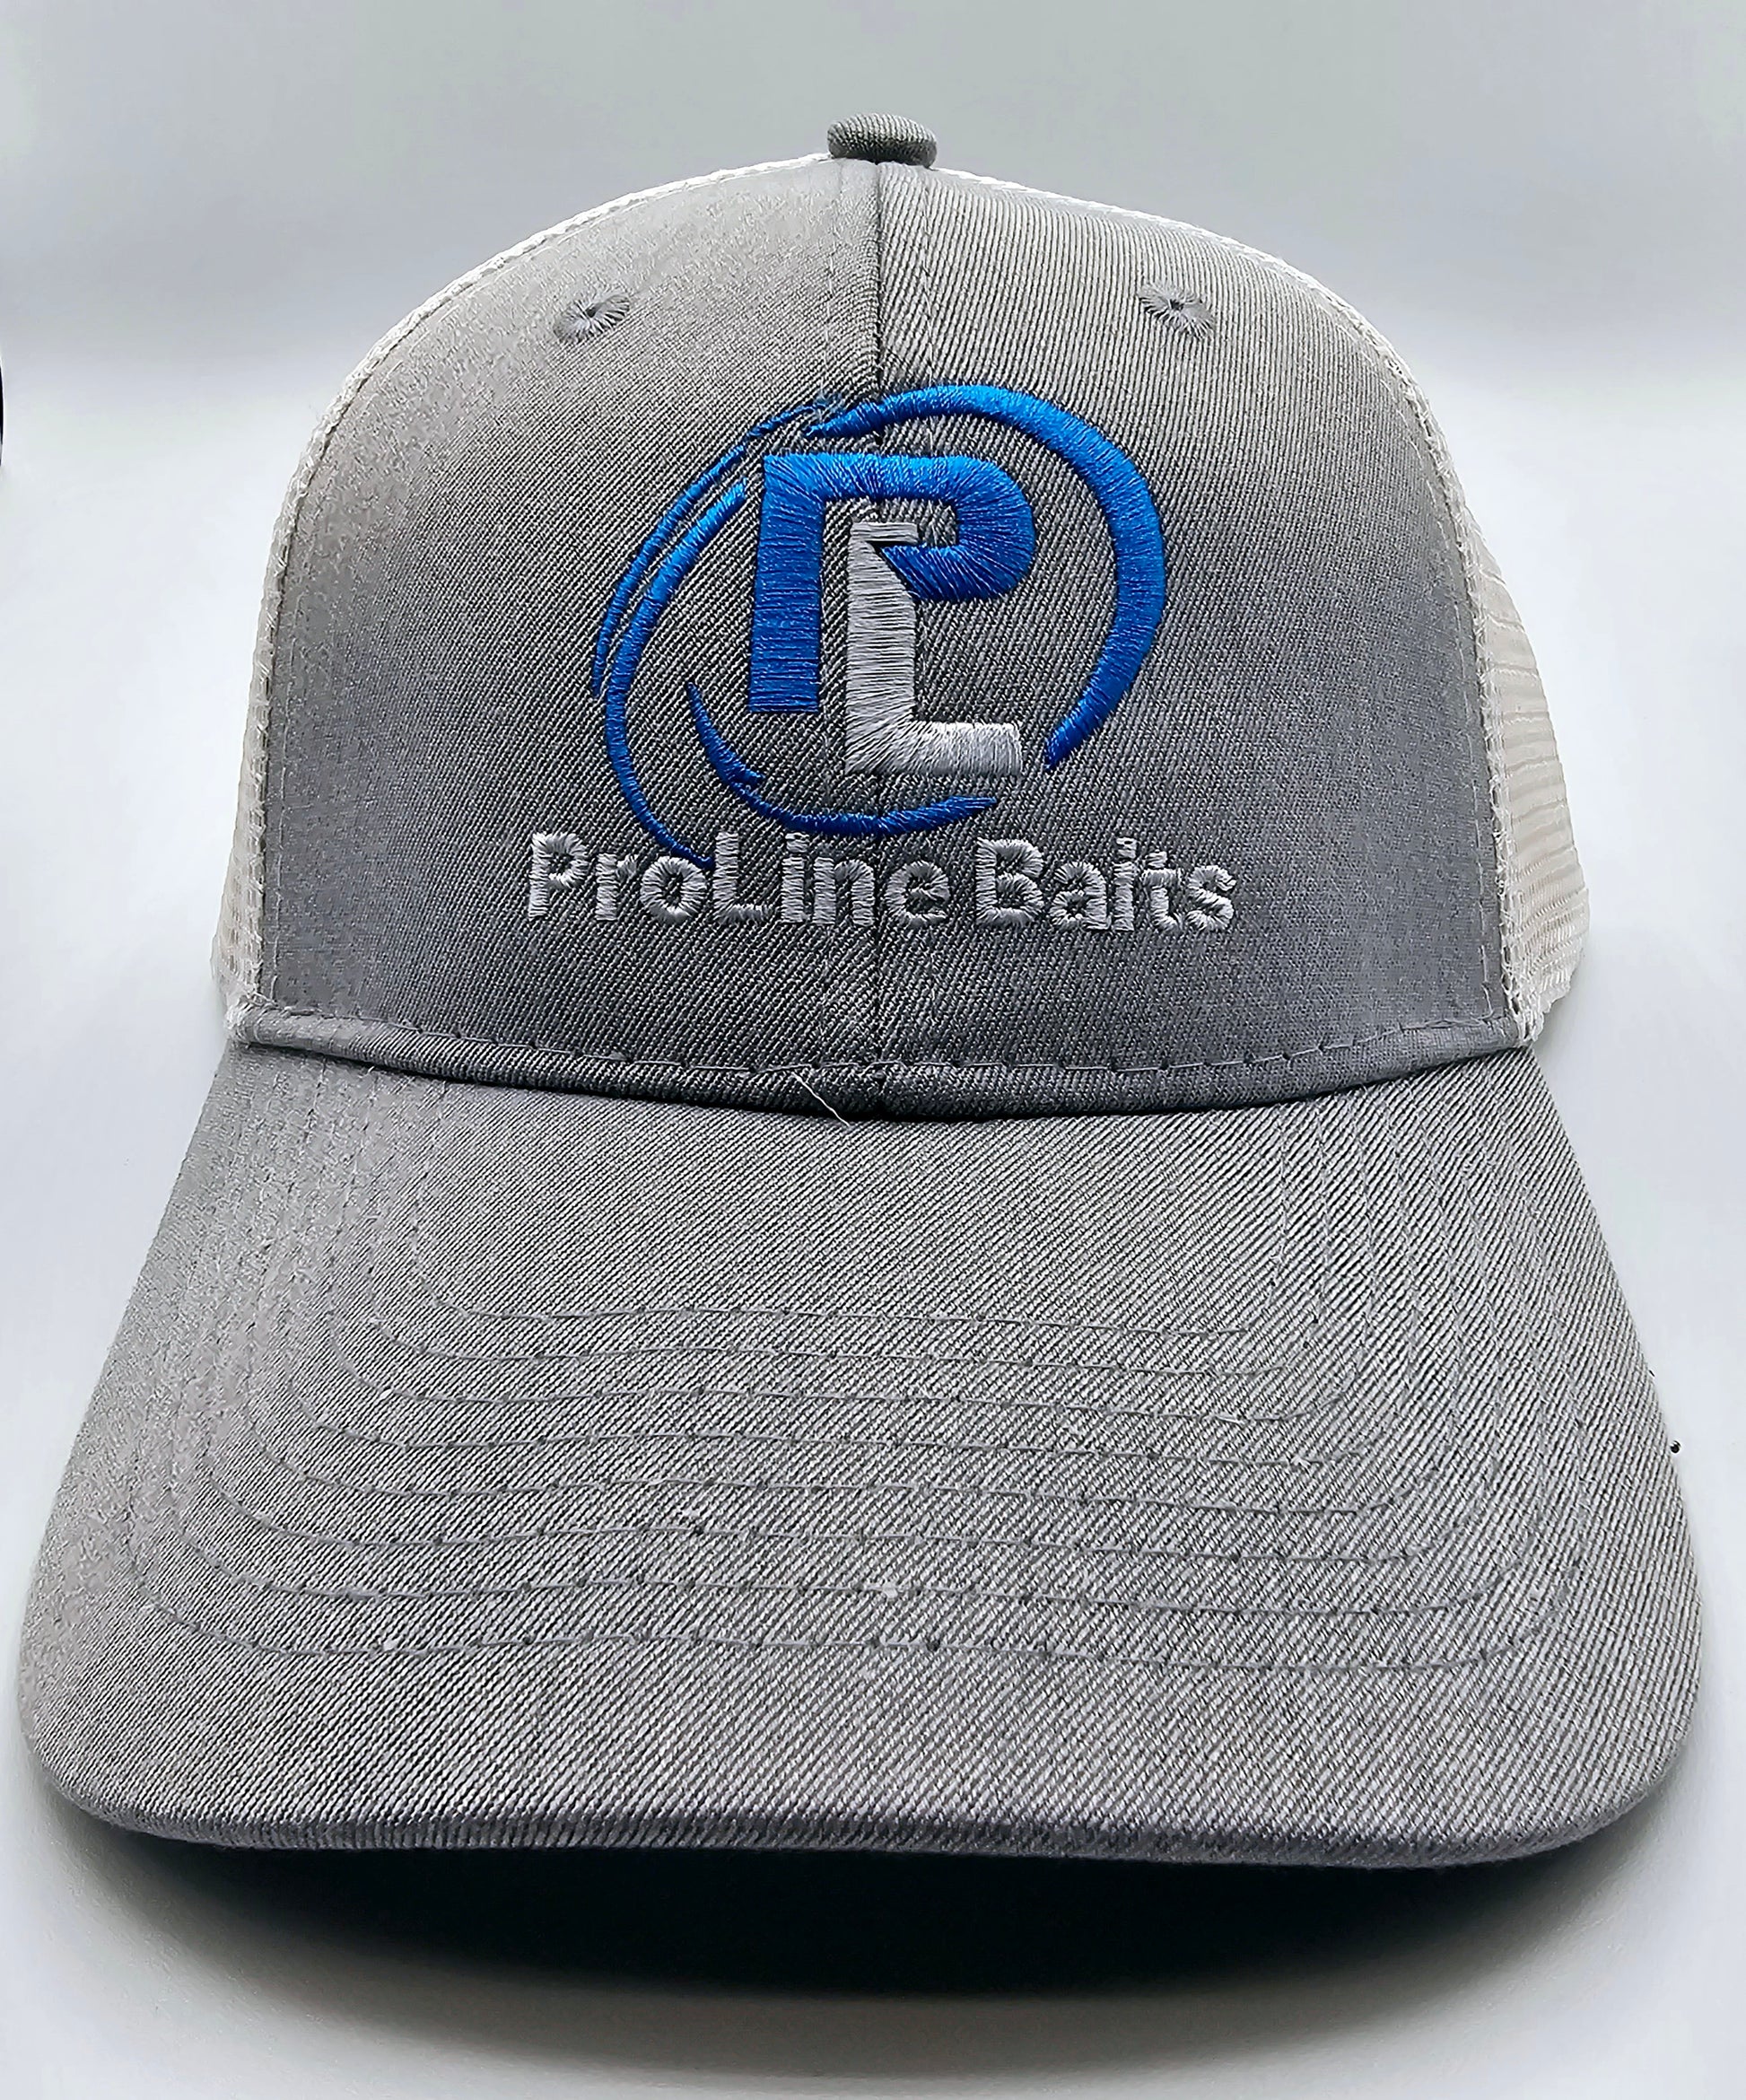 Catfish Series, Check out the New Catfish Series at www.prolinebaits.com